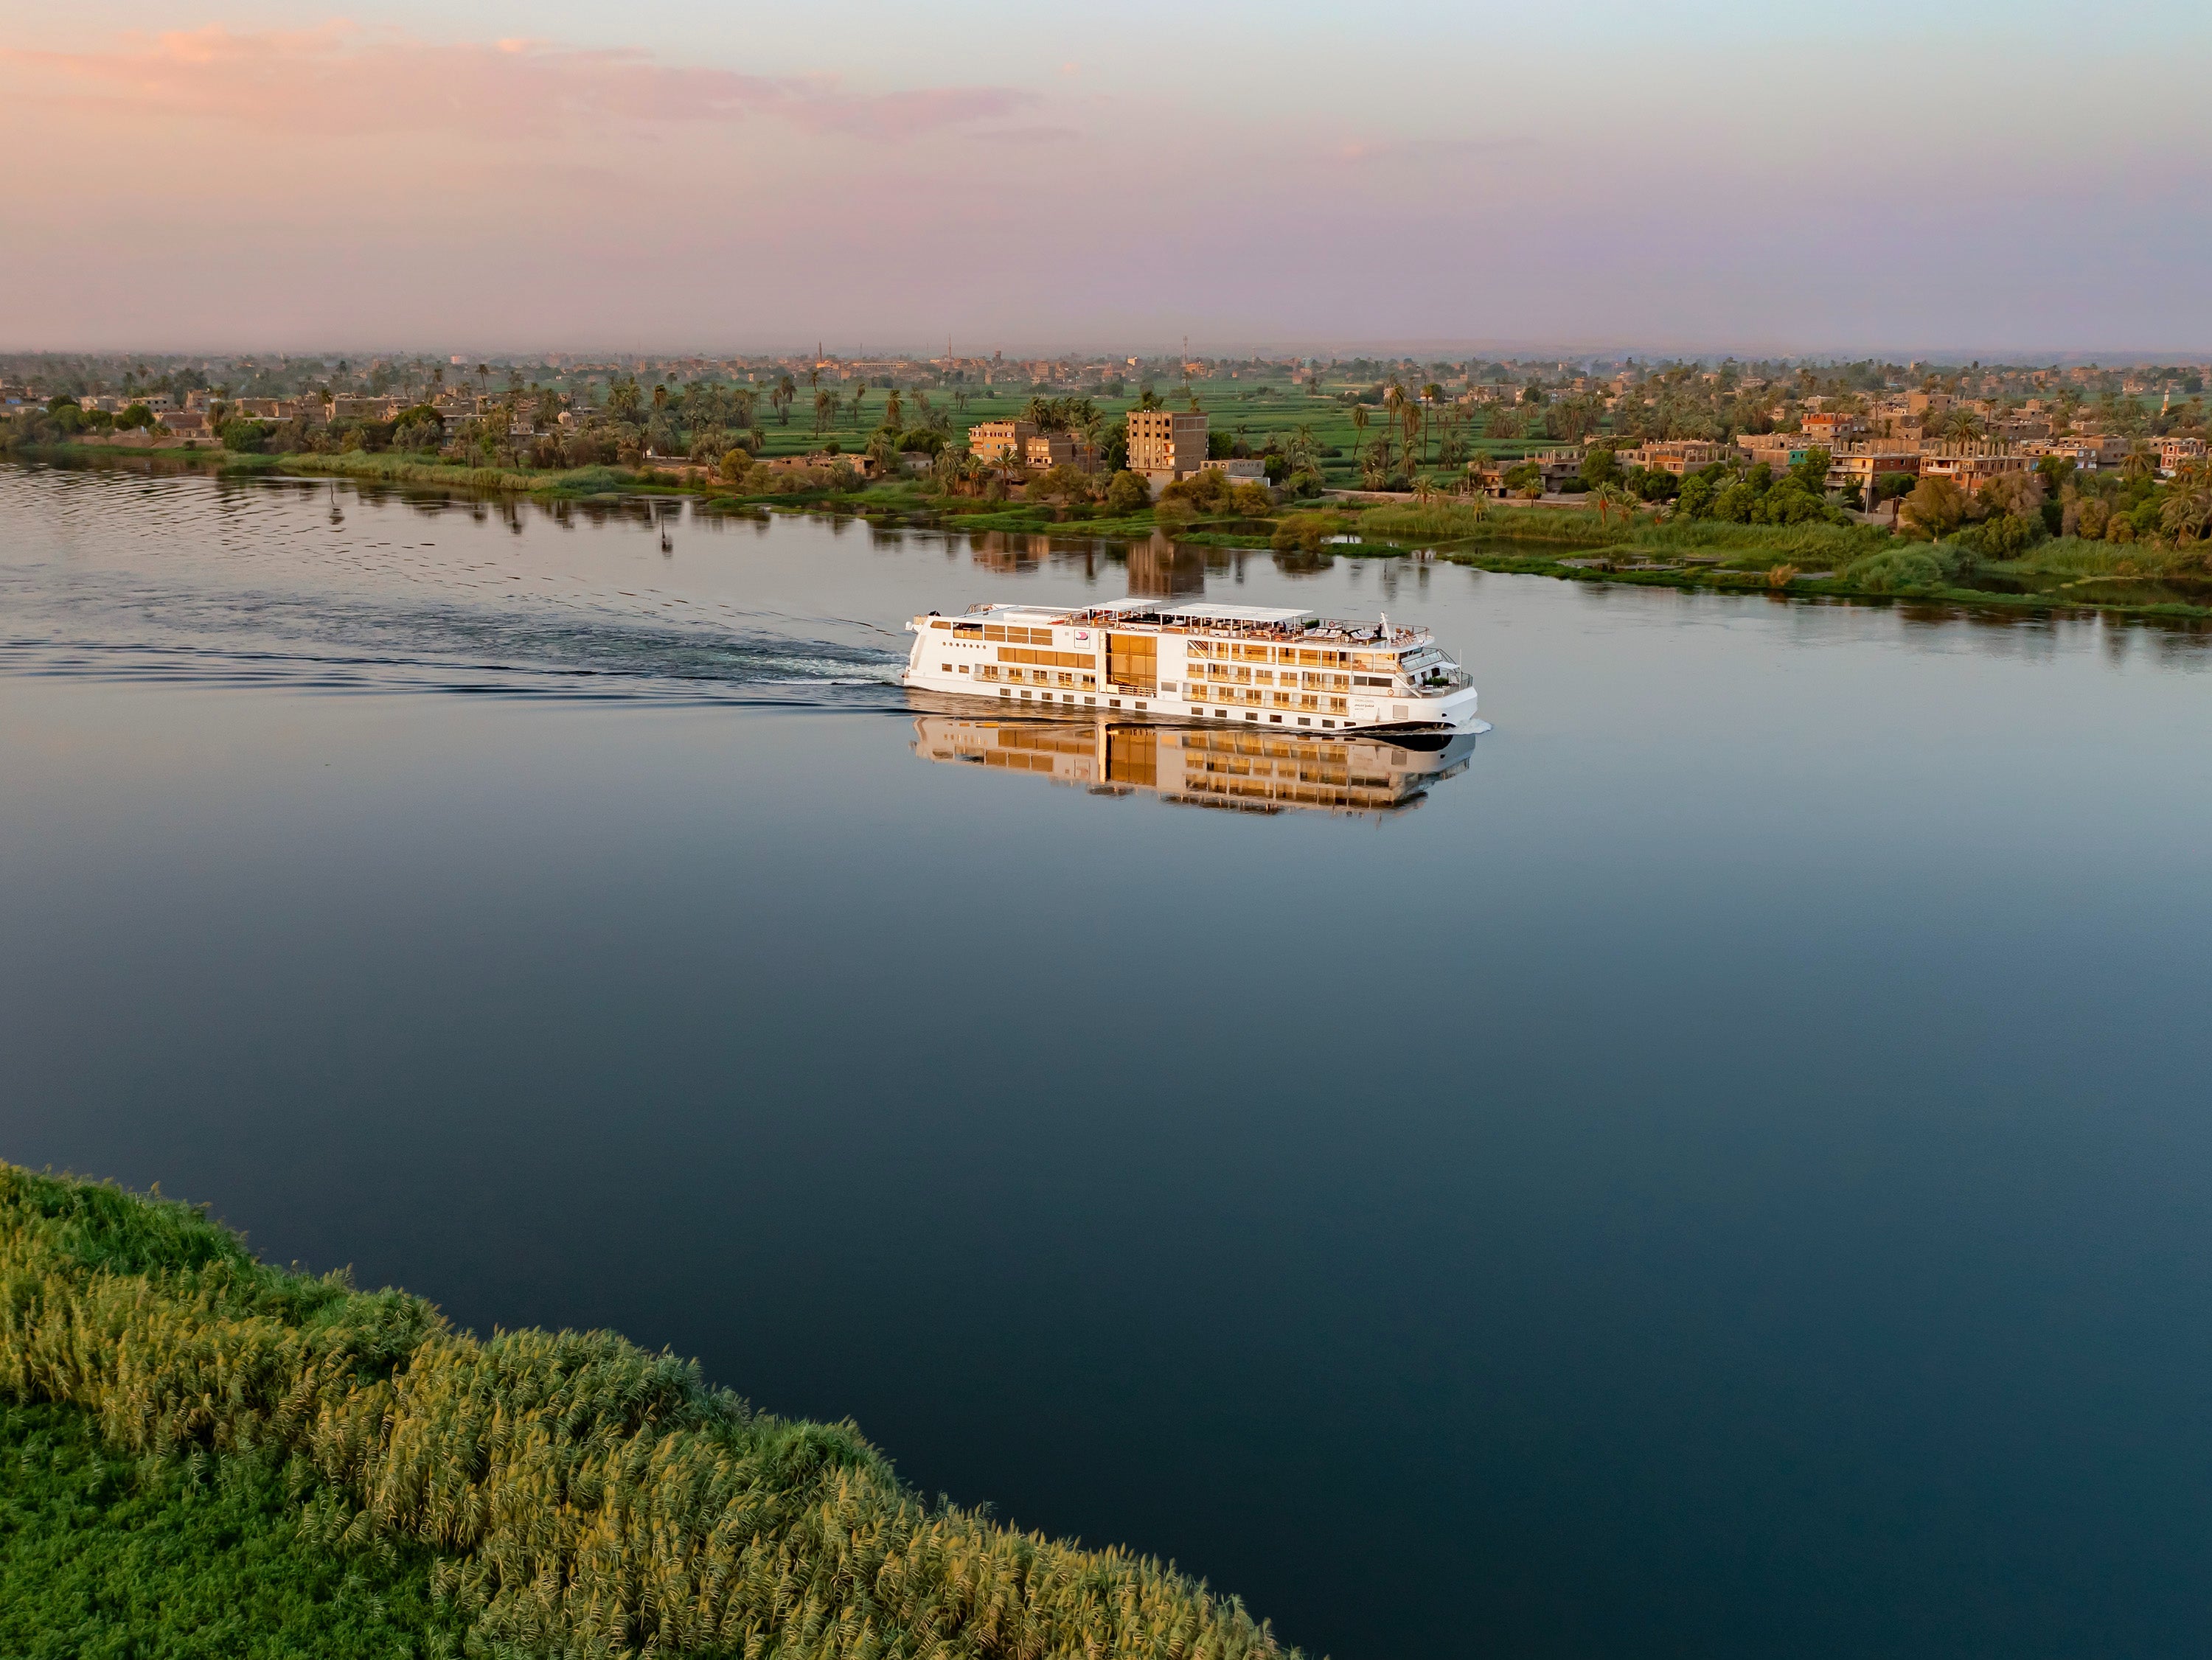 Escape dreary December days on a cruise of the Nile